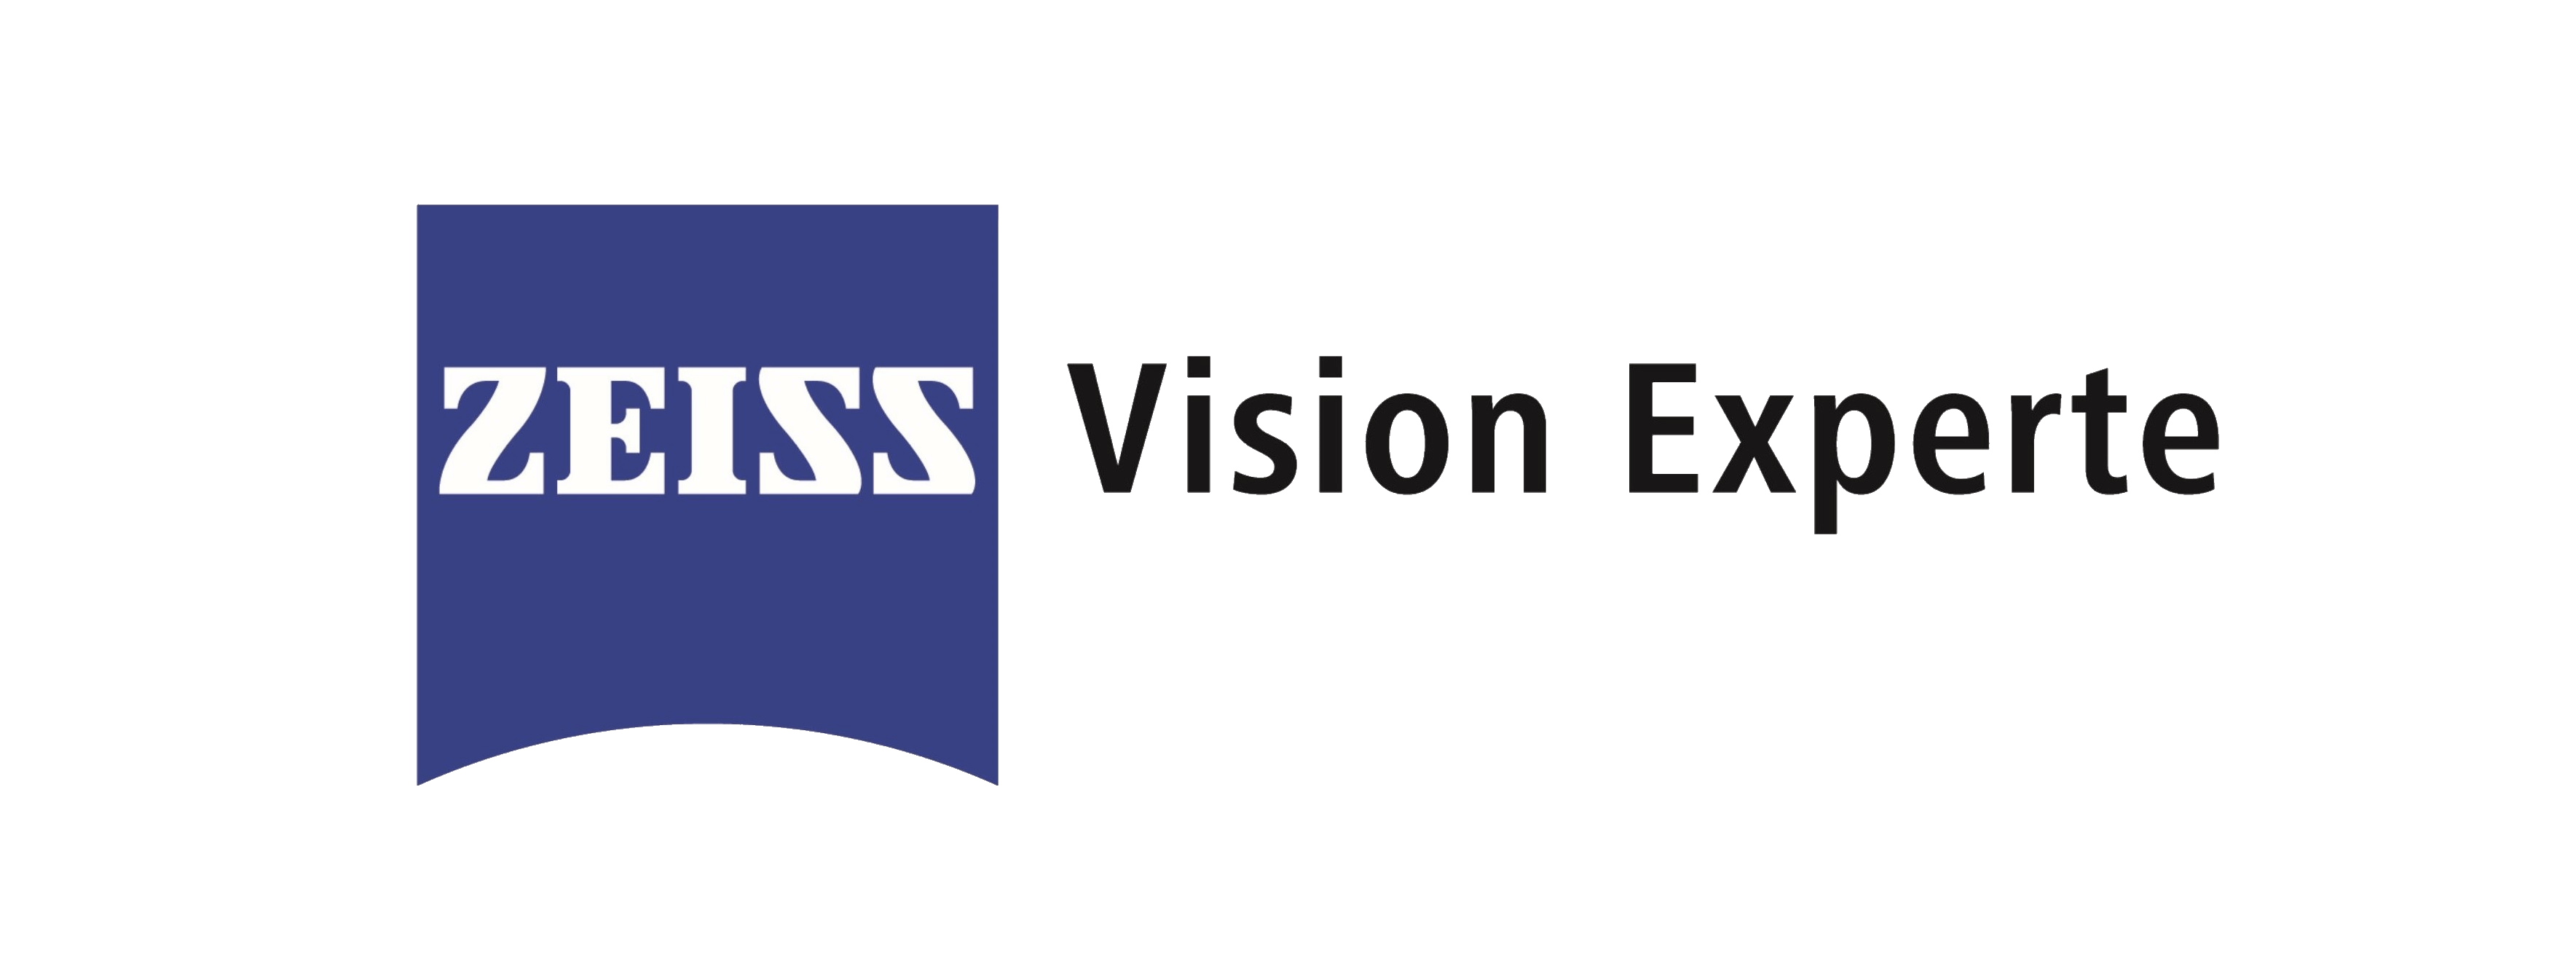 Zeiss Vision Experte